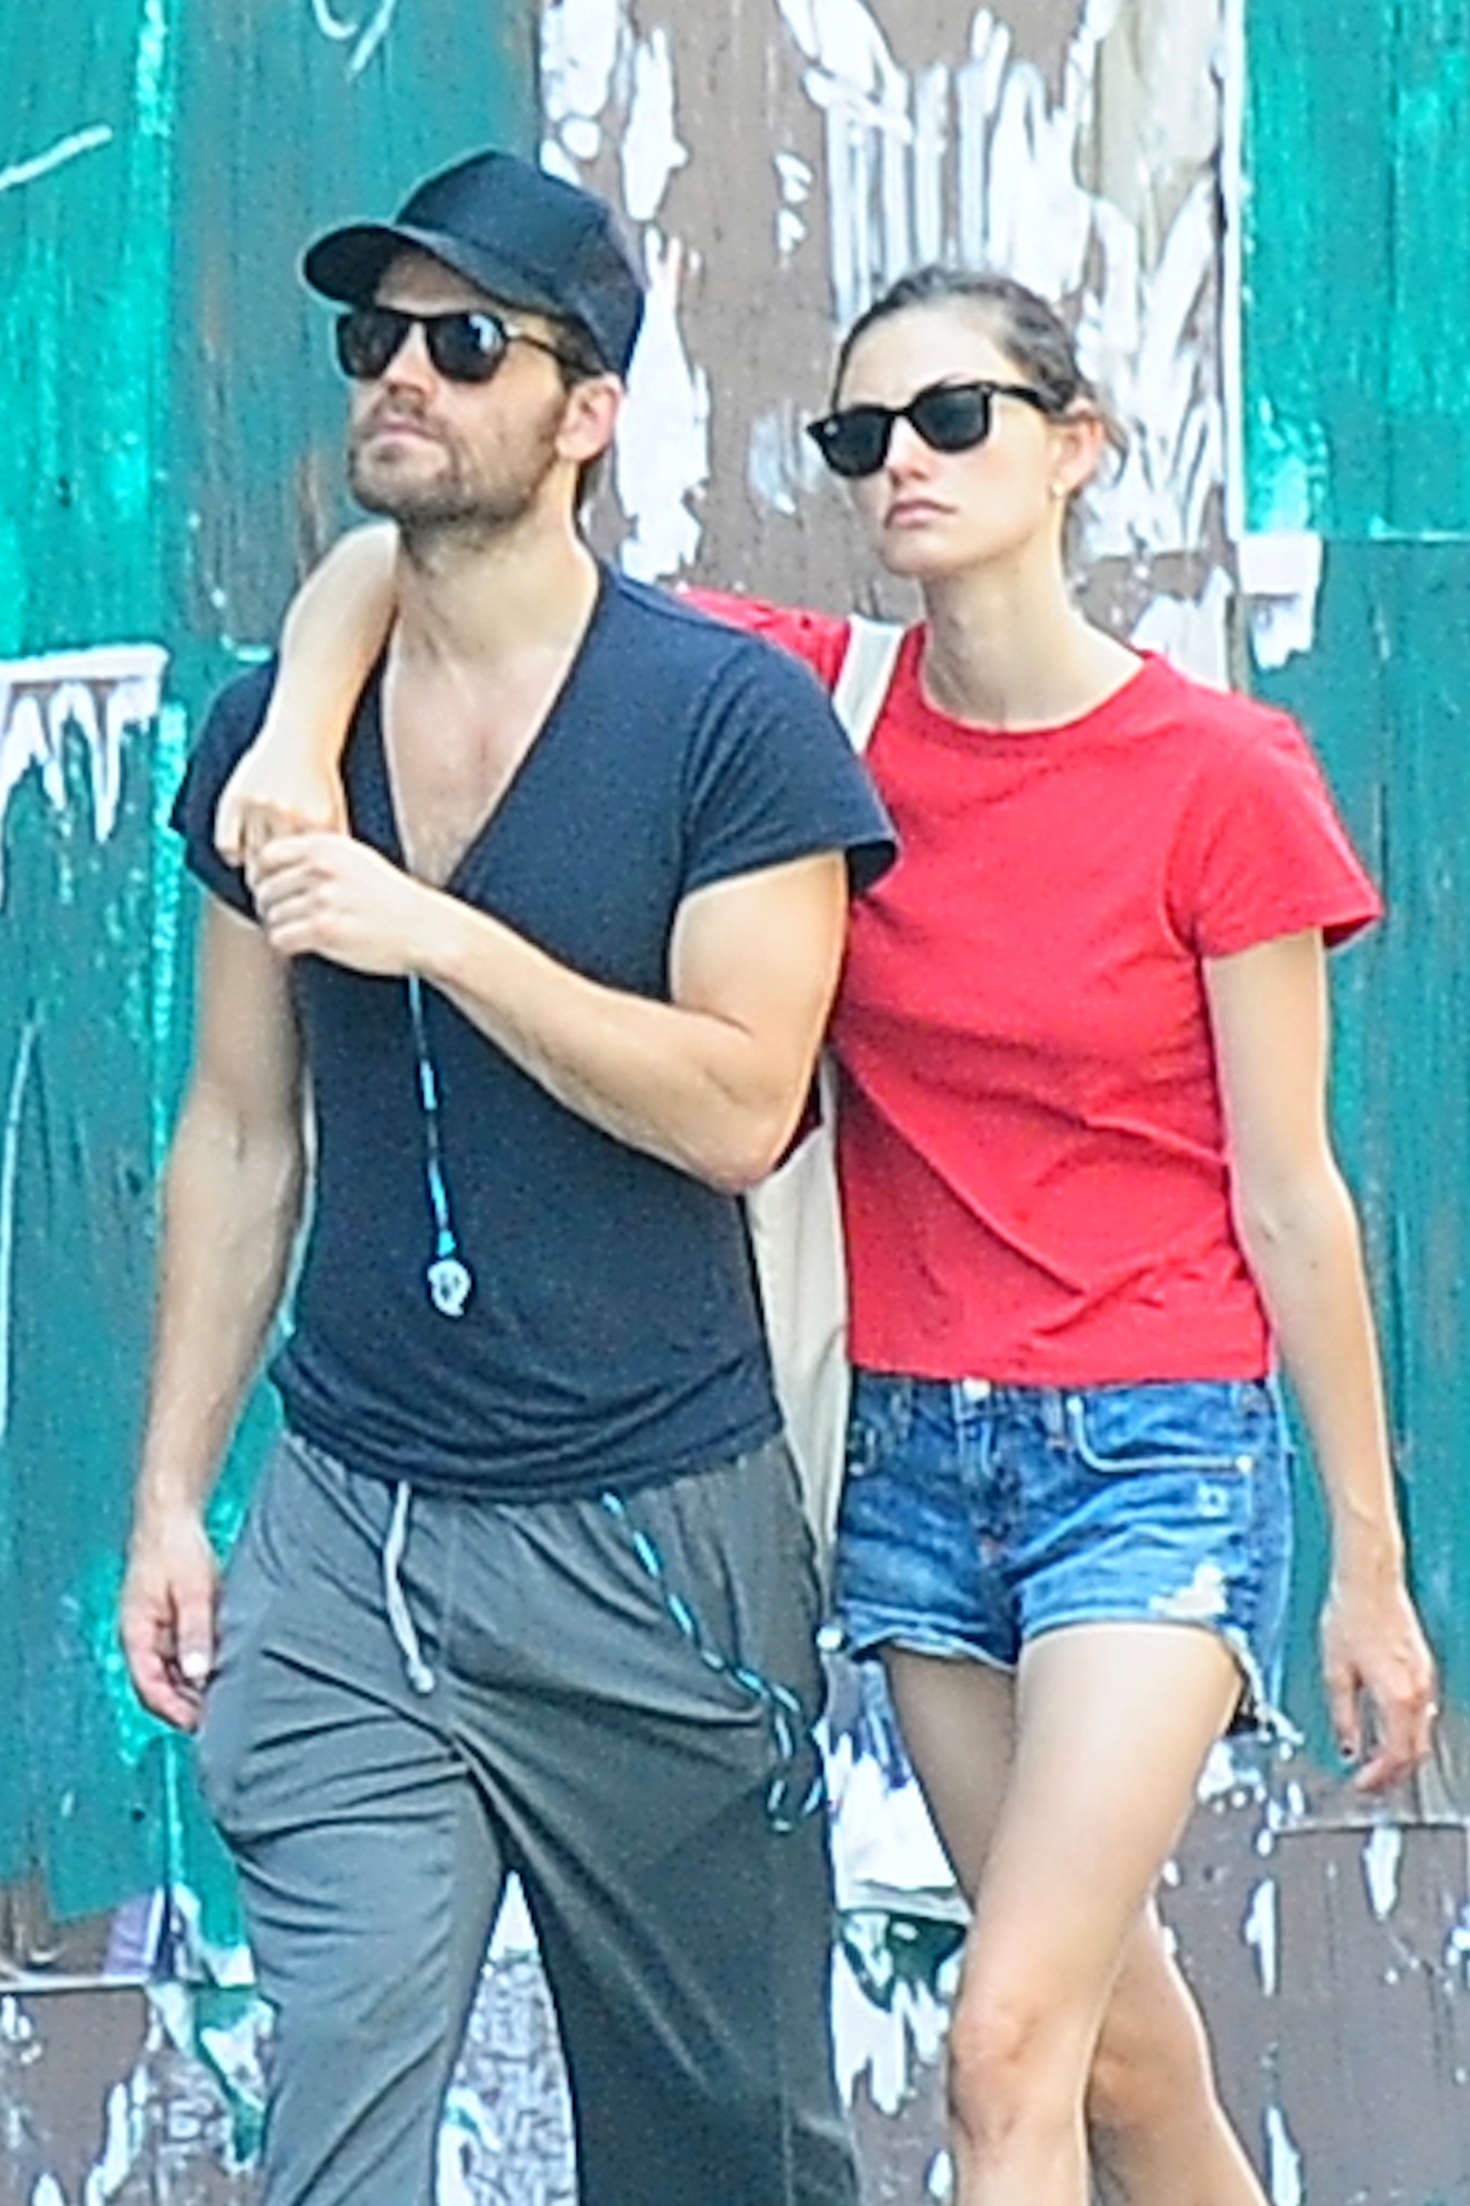 Phoebe Tonkin and Paul Wesley Out in New York City